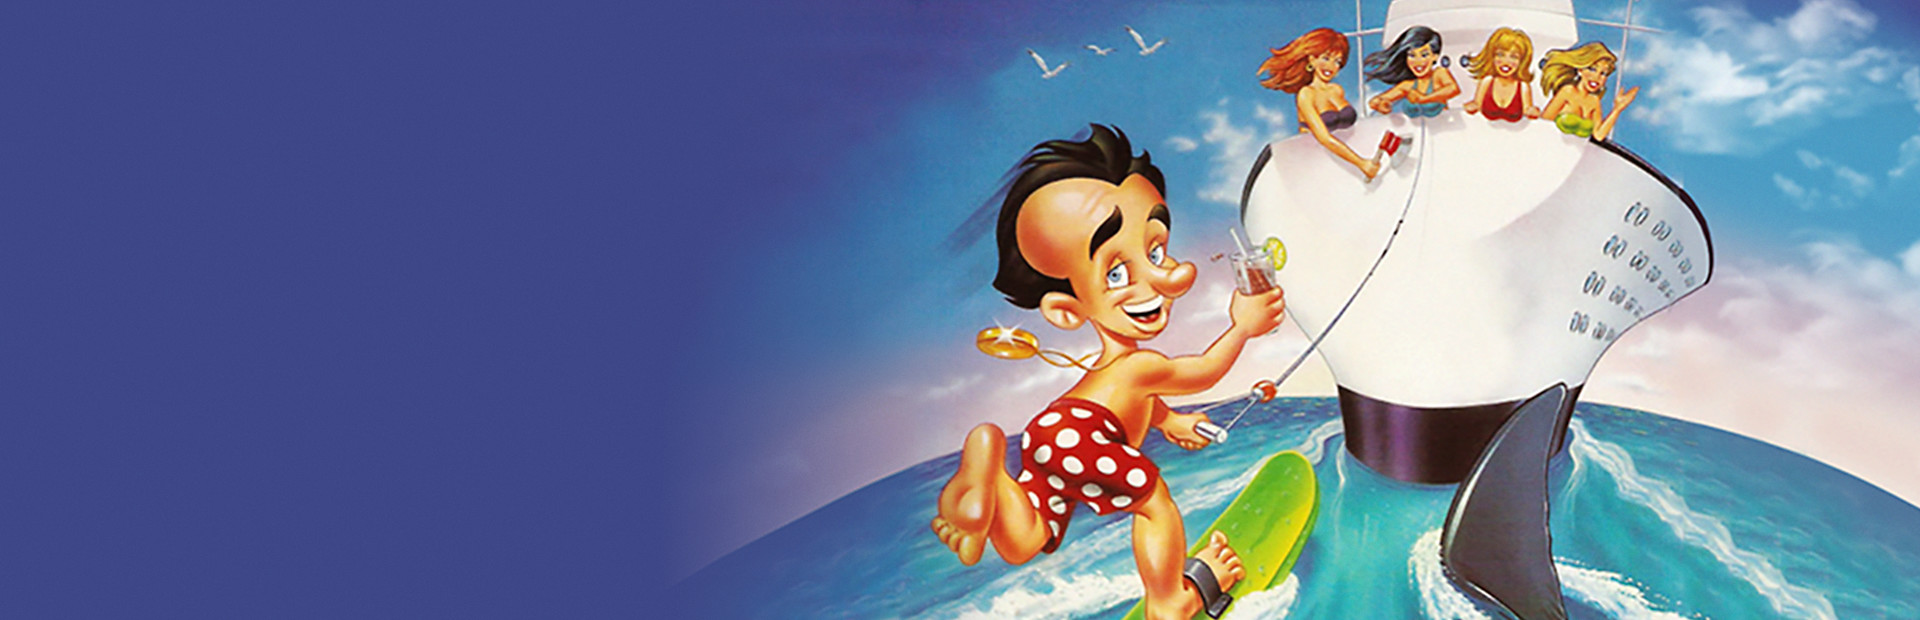 Leisure Suit Larry 7 - Love for Sail cover image